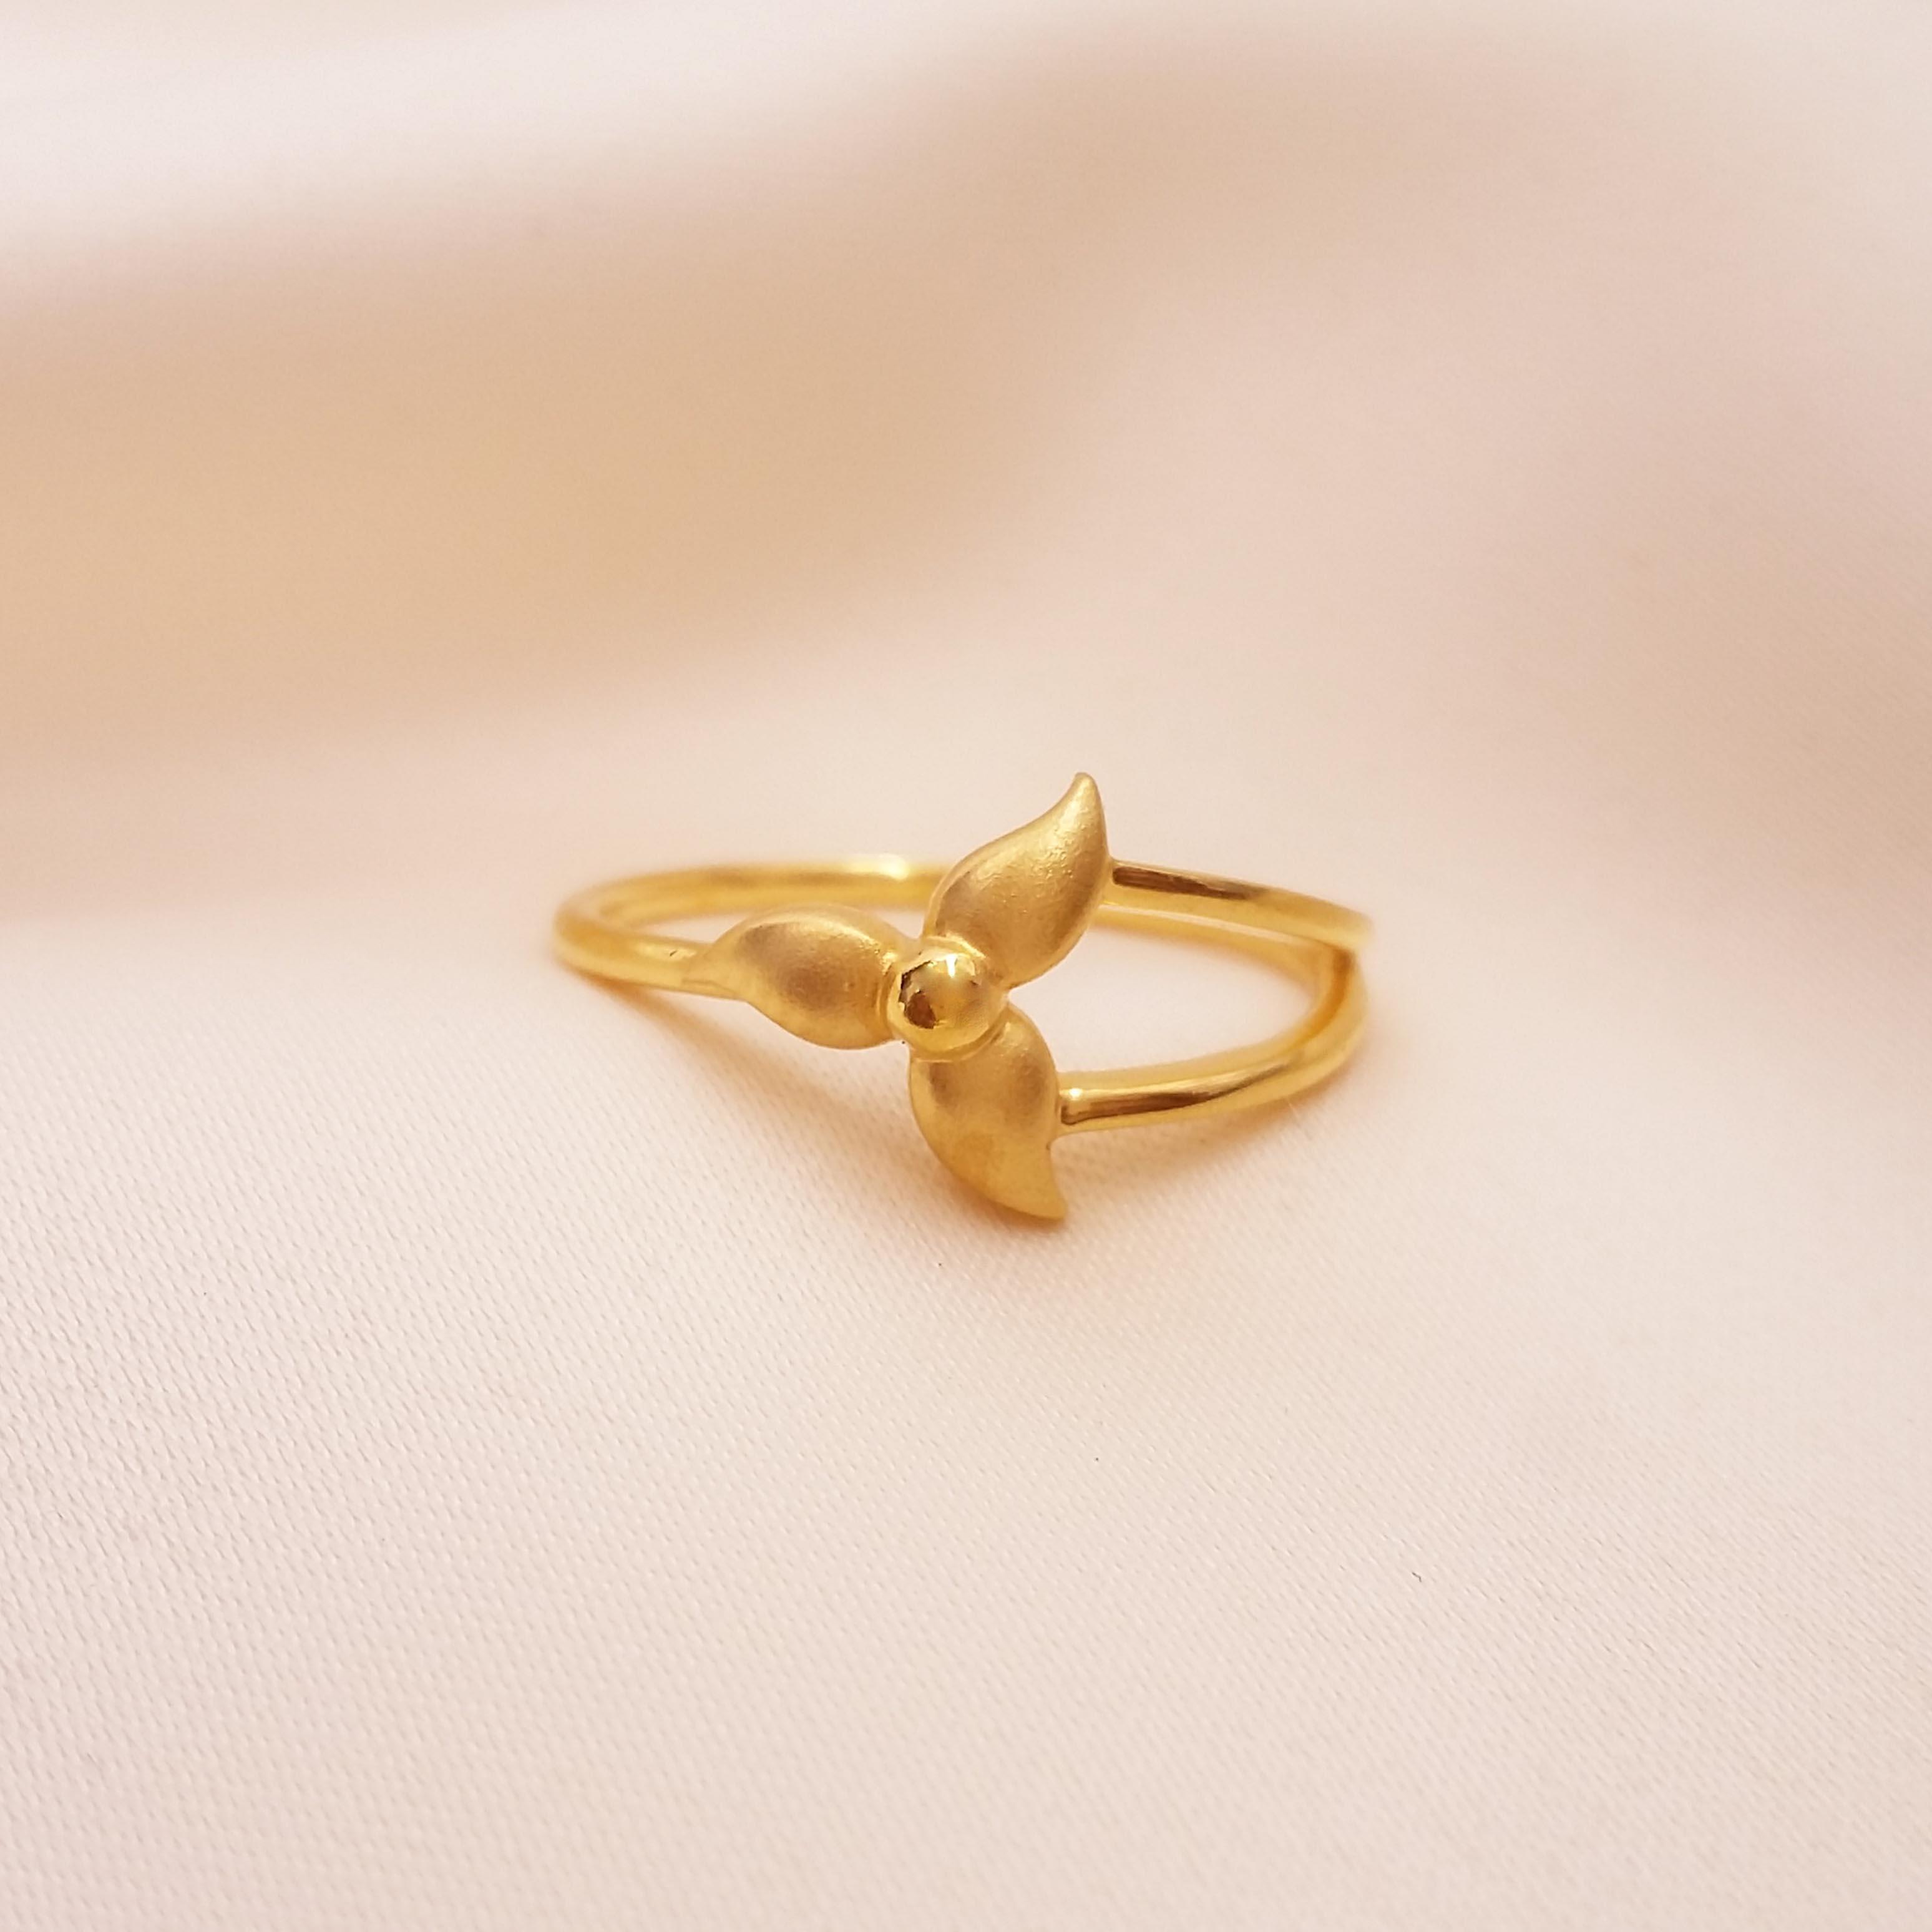 Buy Triflora Gold Ring 22 KT yellow gold (2.34 gm). | Online By Giriraj Jewellers